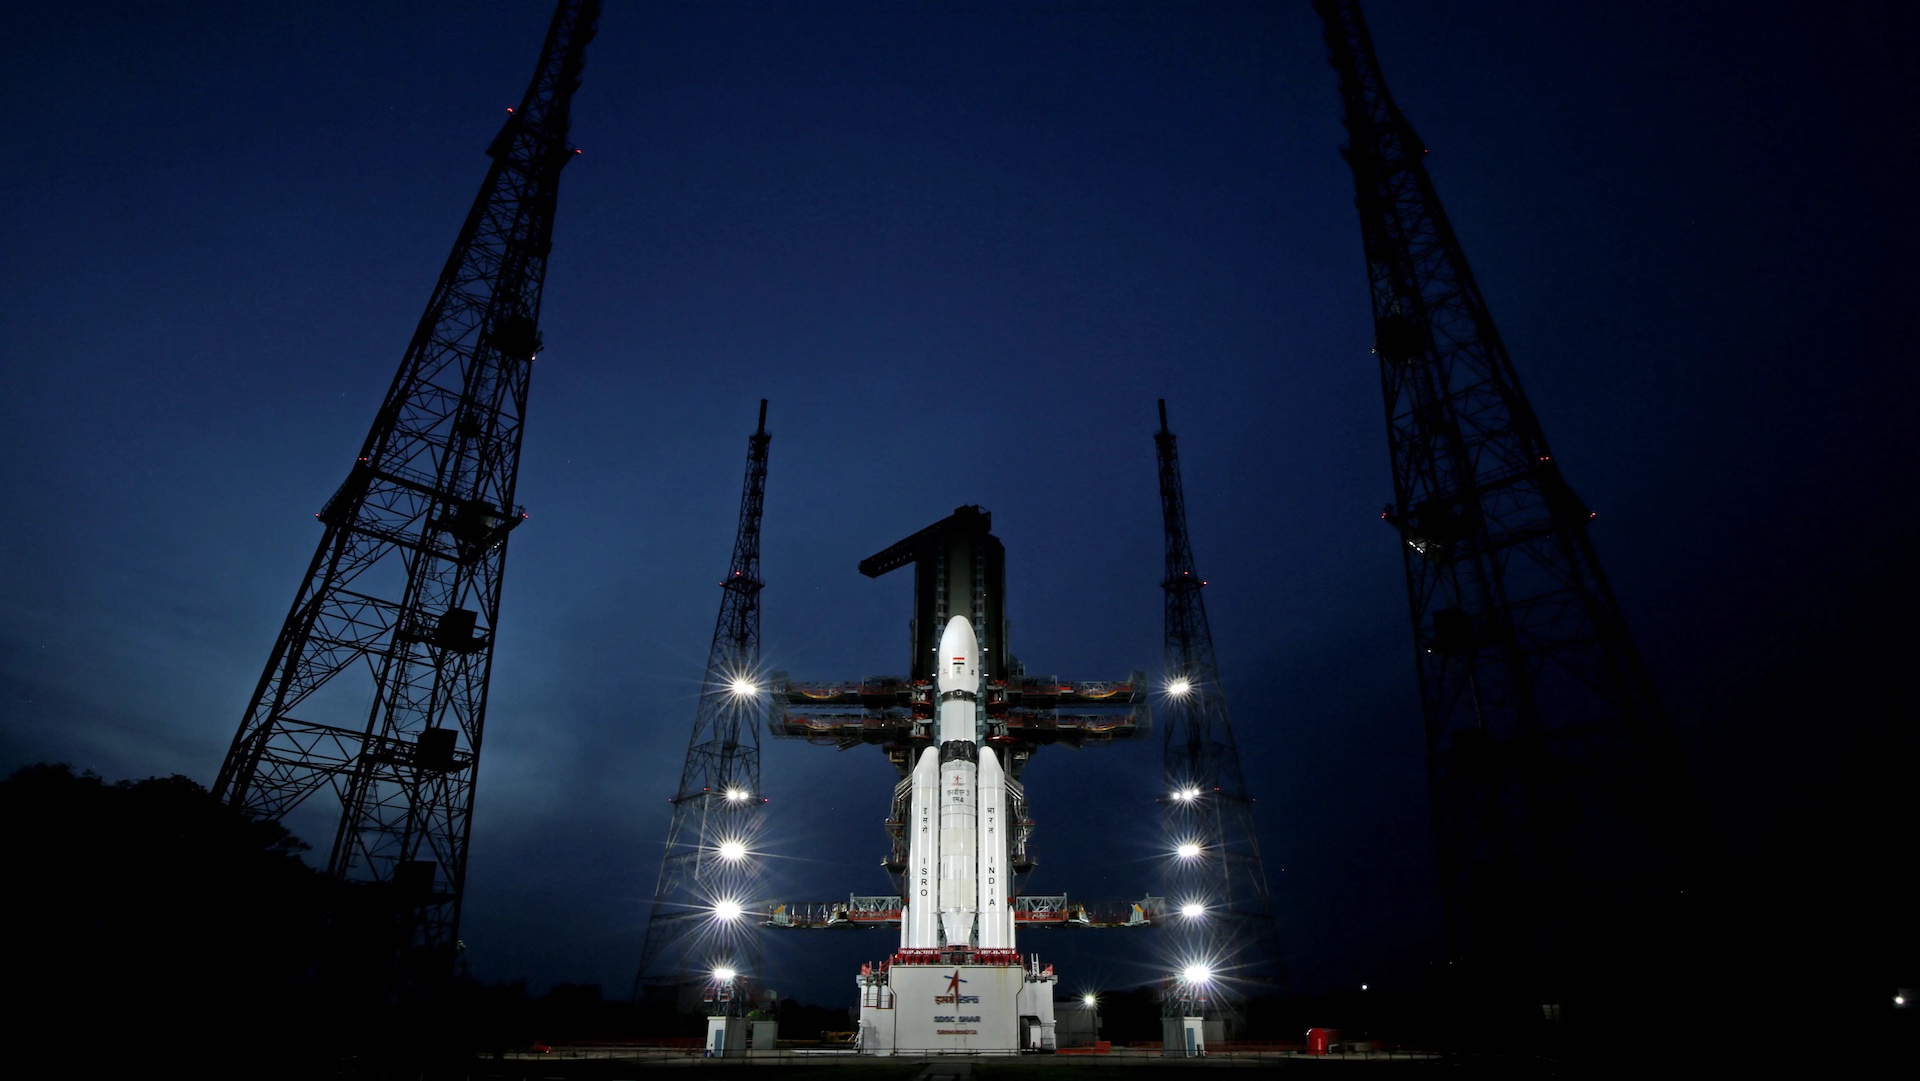 Indian Space Research Organization (ISRO) Geosynchronous Satellite Launch Vehicle Mark III (GSLV Mk 3 / LVM3)